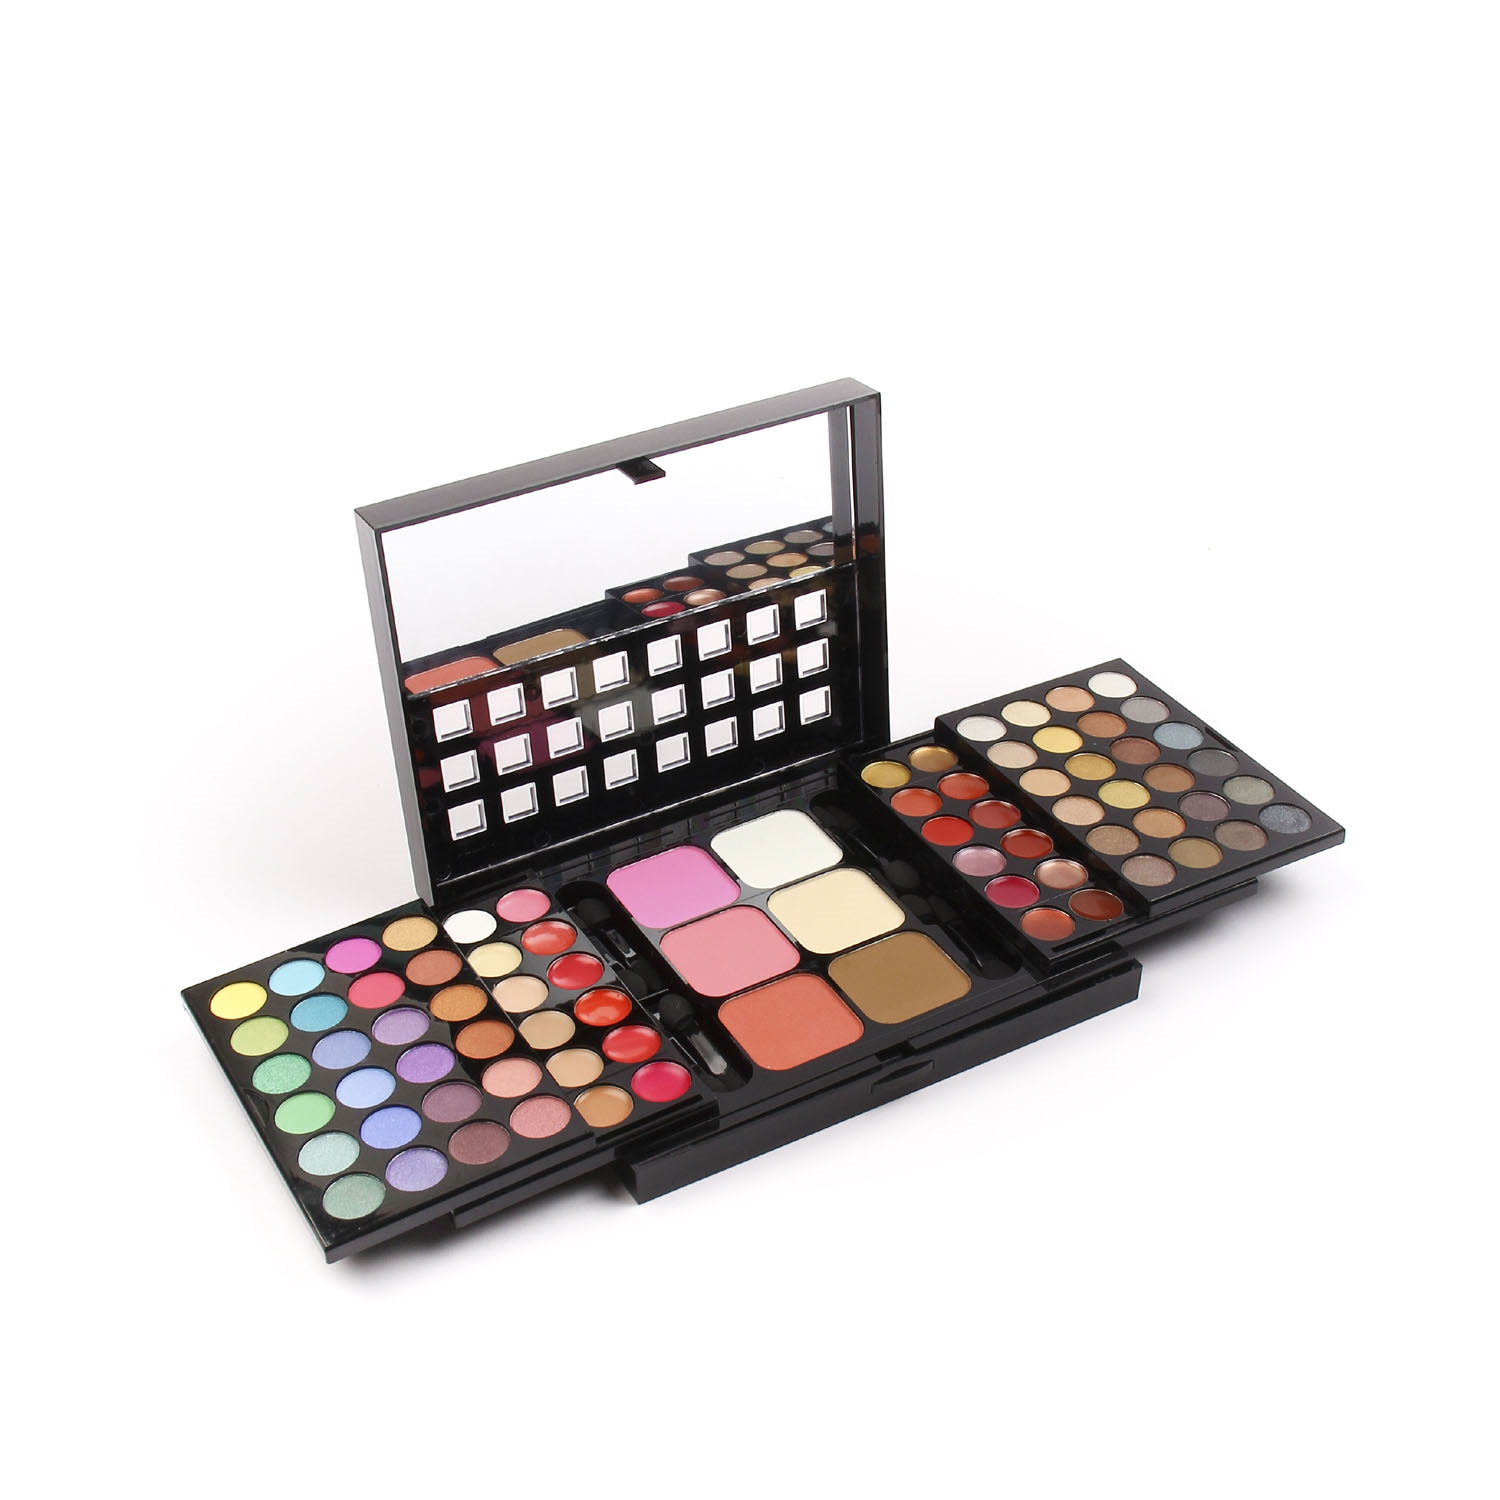 Sedell Professional 78 Colors Sliding Eyeshadow Palette Set with Brushes